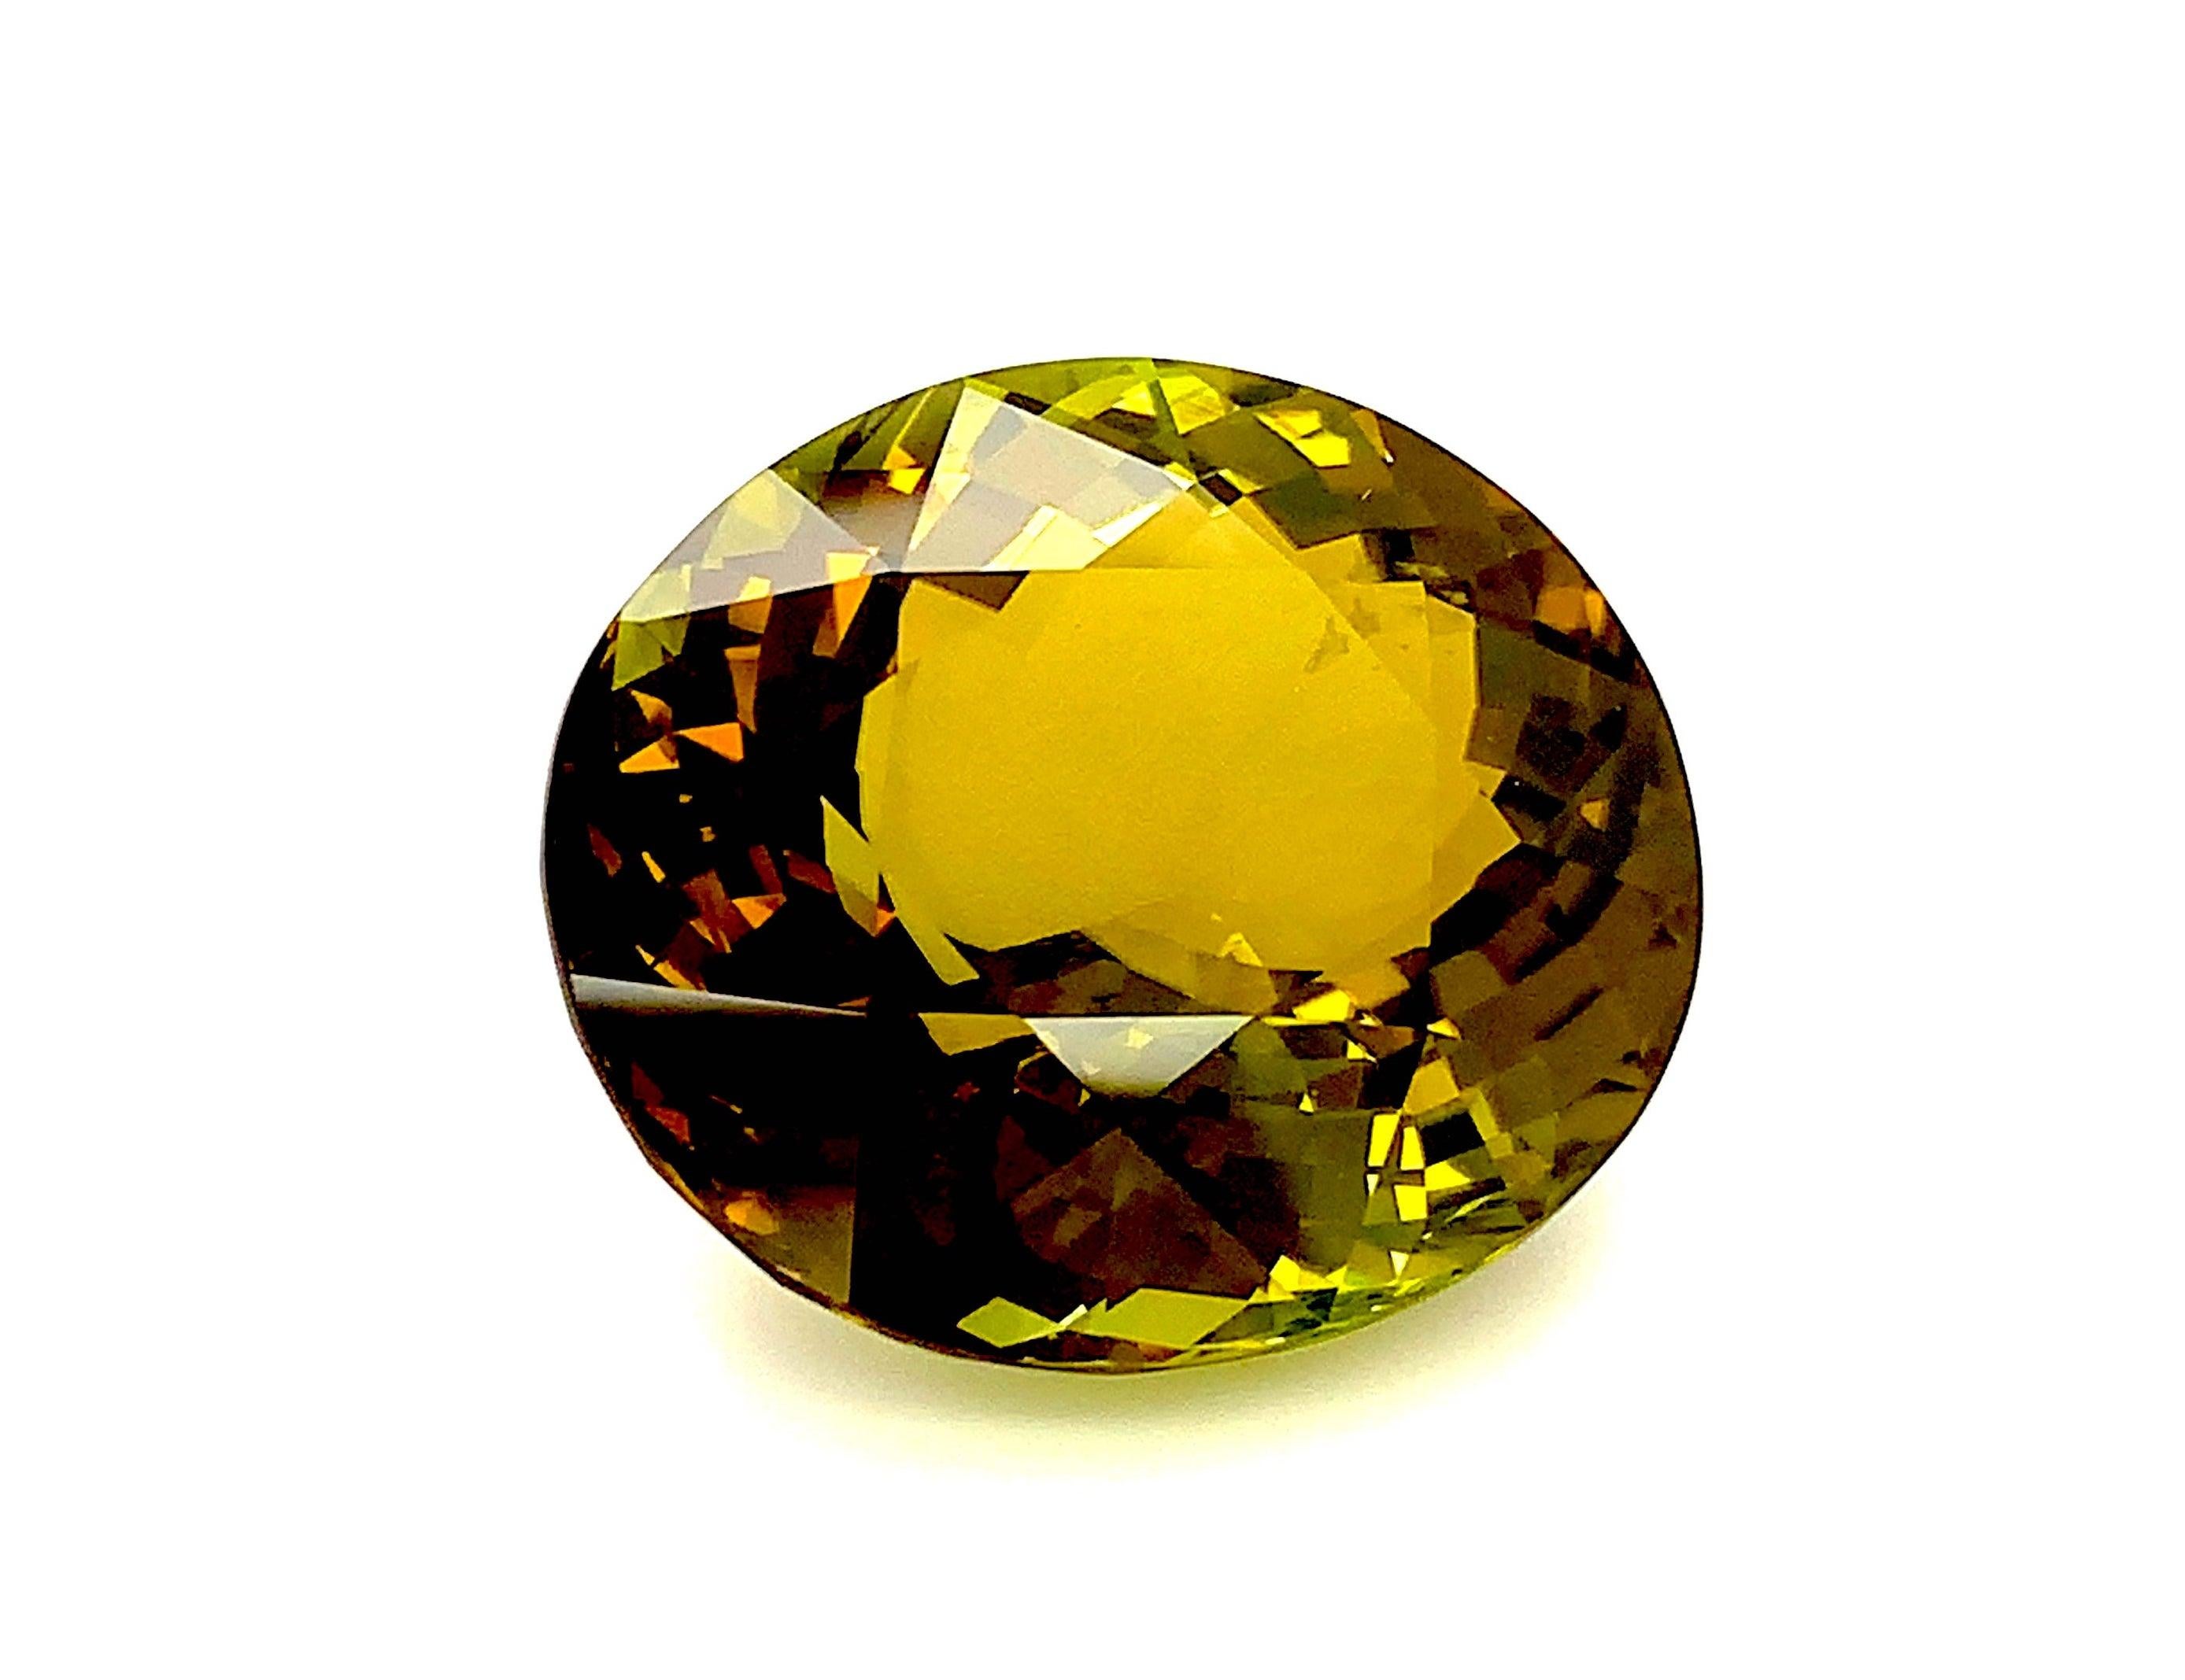  79.78 Carat Golden Olive Tourmaline Oval, Loose Gemstone, GIA Certified ...A For Sale 2